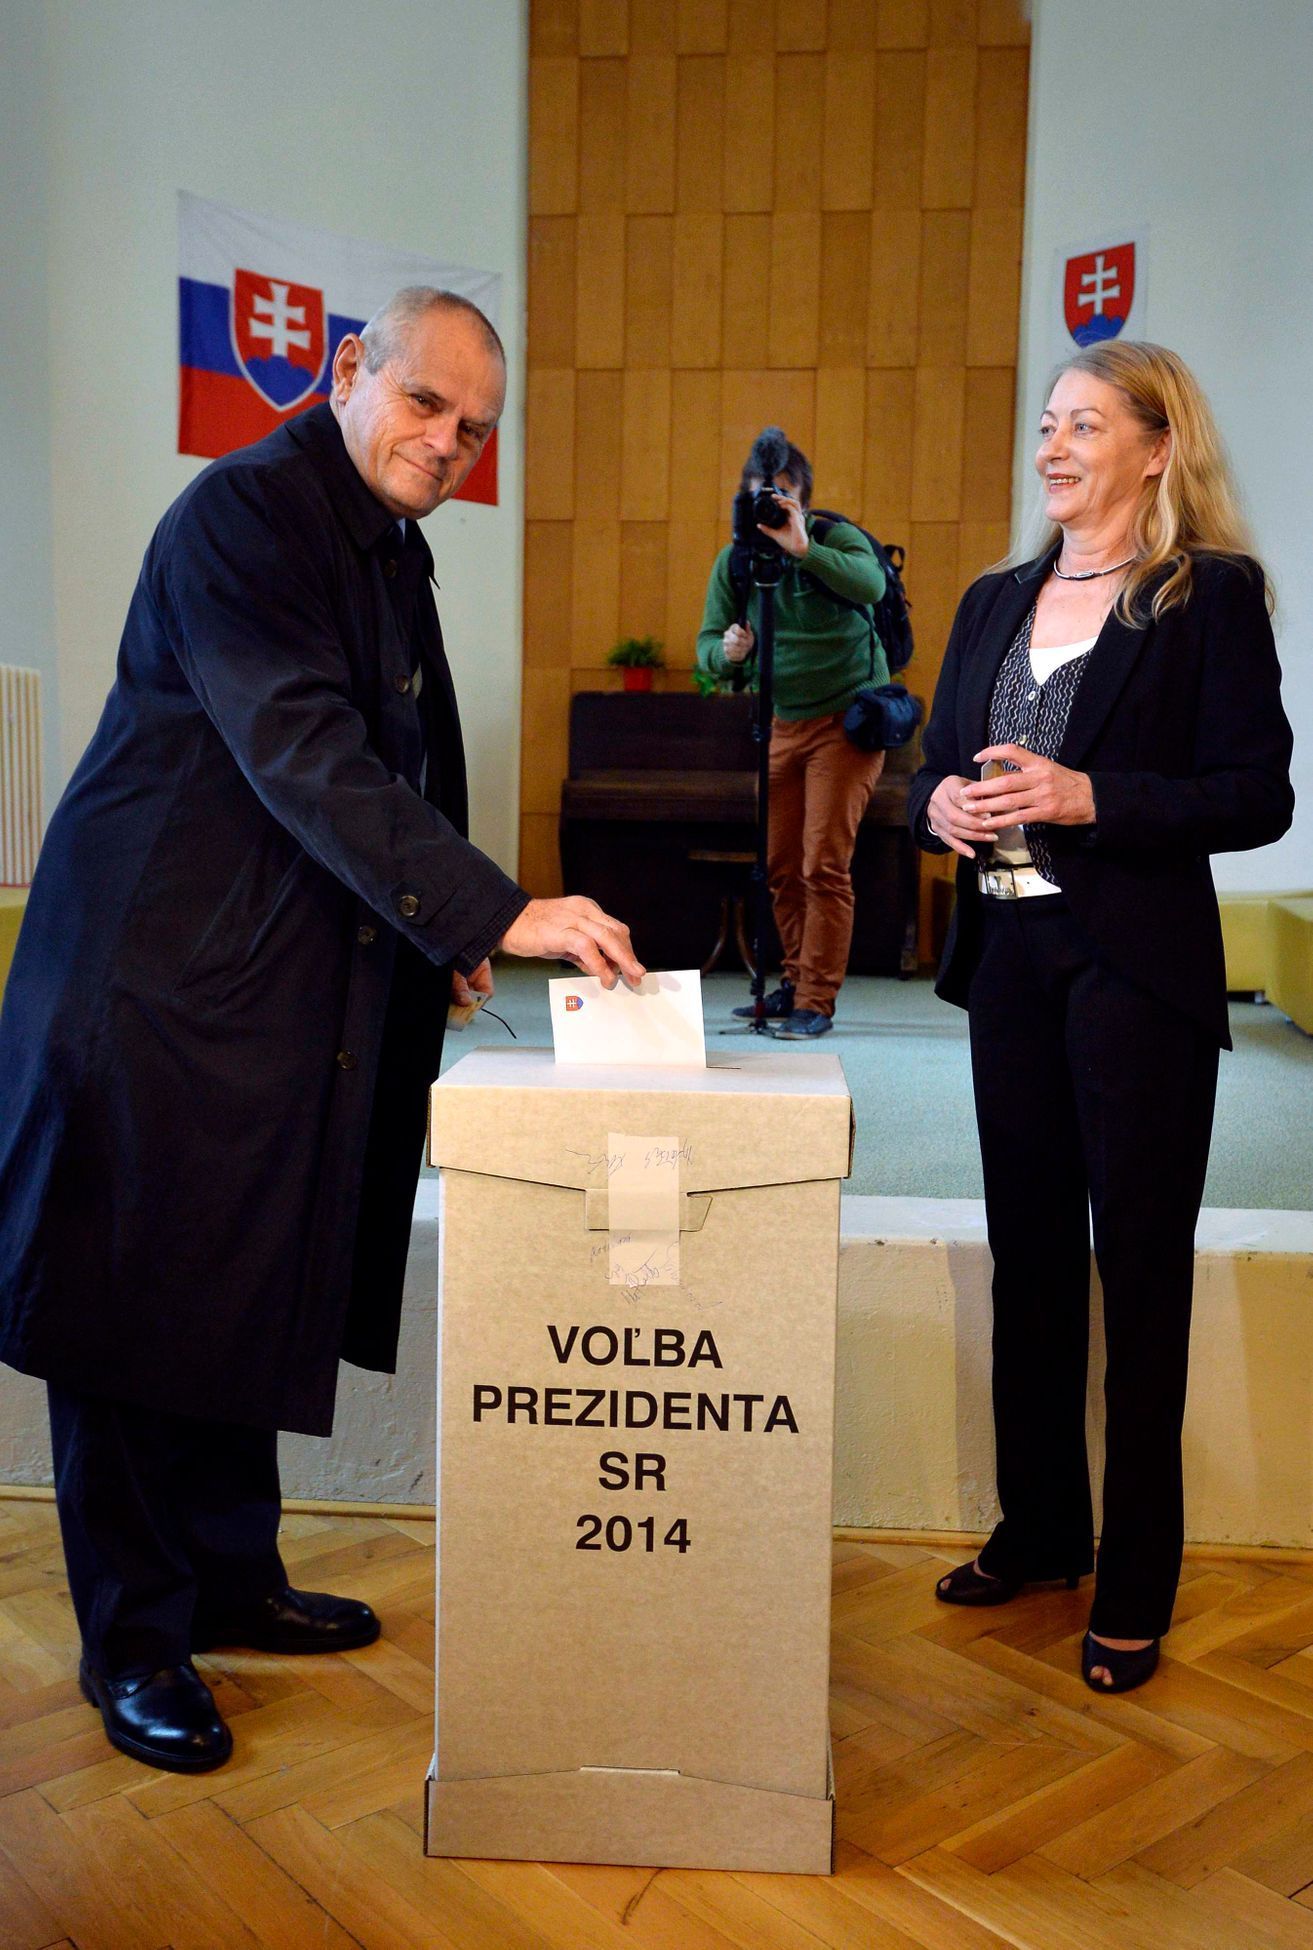 Slovakia's presidential candidate Knazko and his wife cast their ballots at a polling station during the first round presidential elections in Bratislava